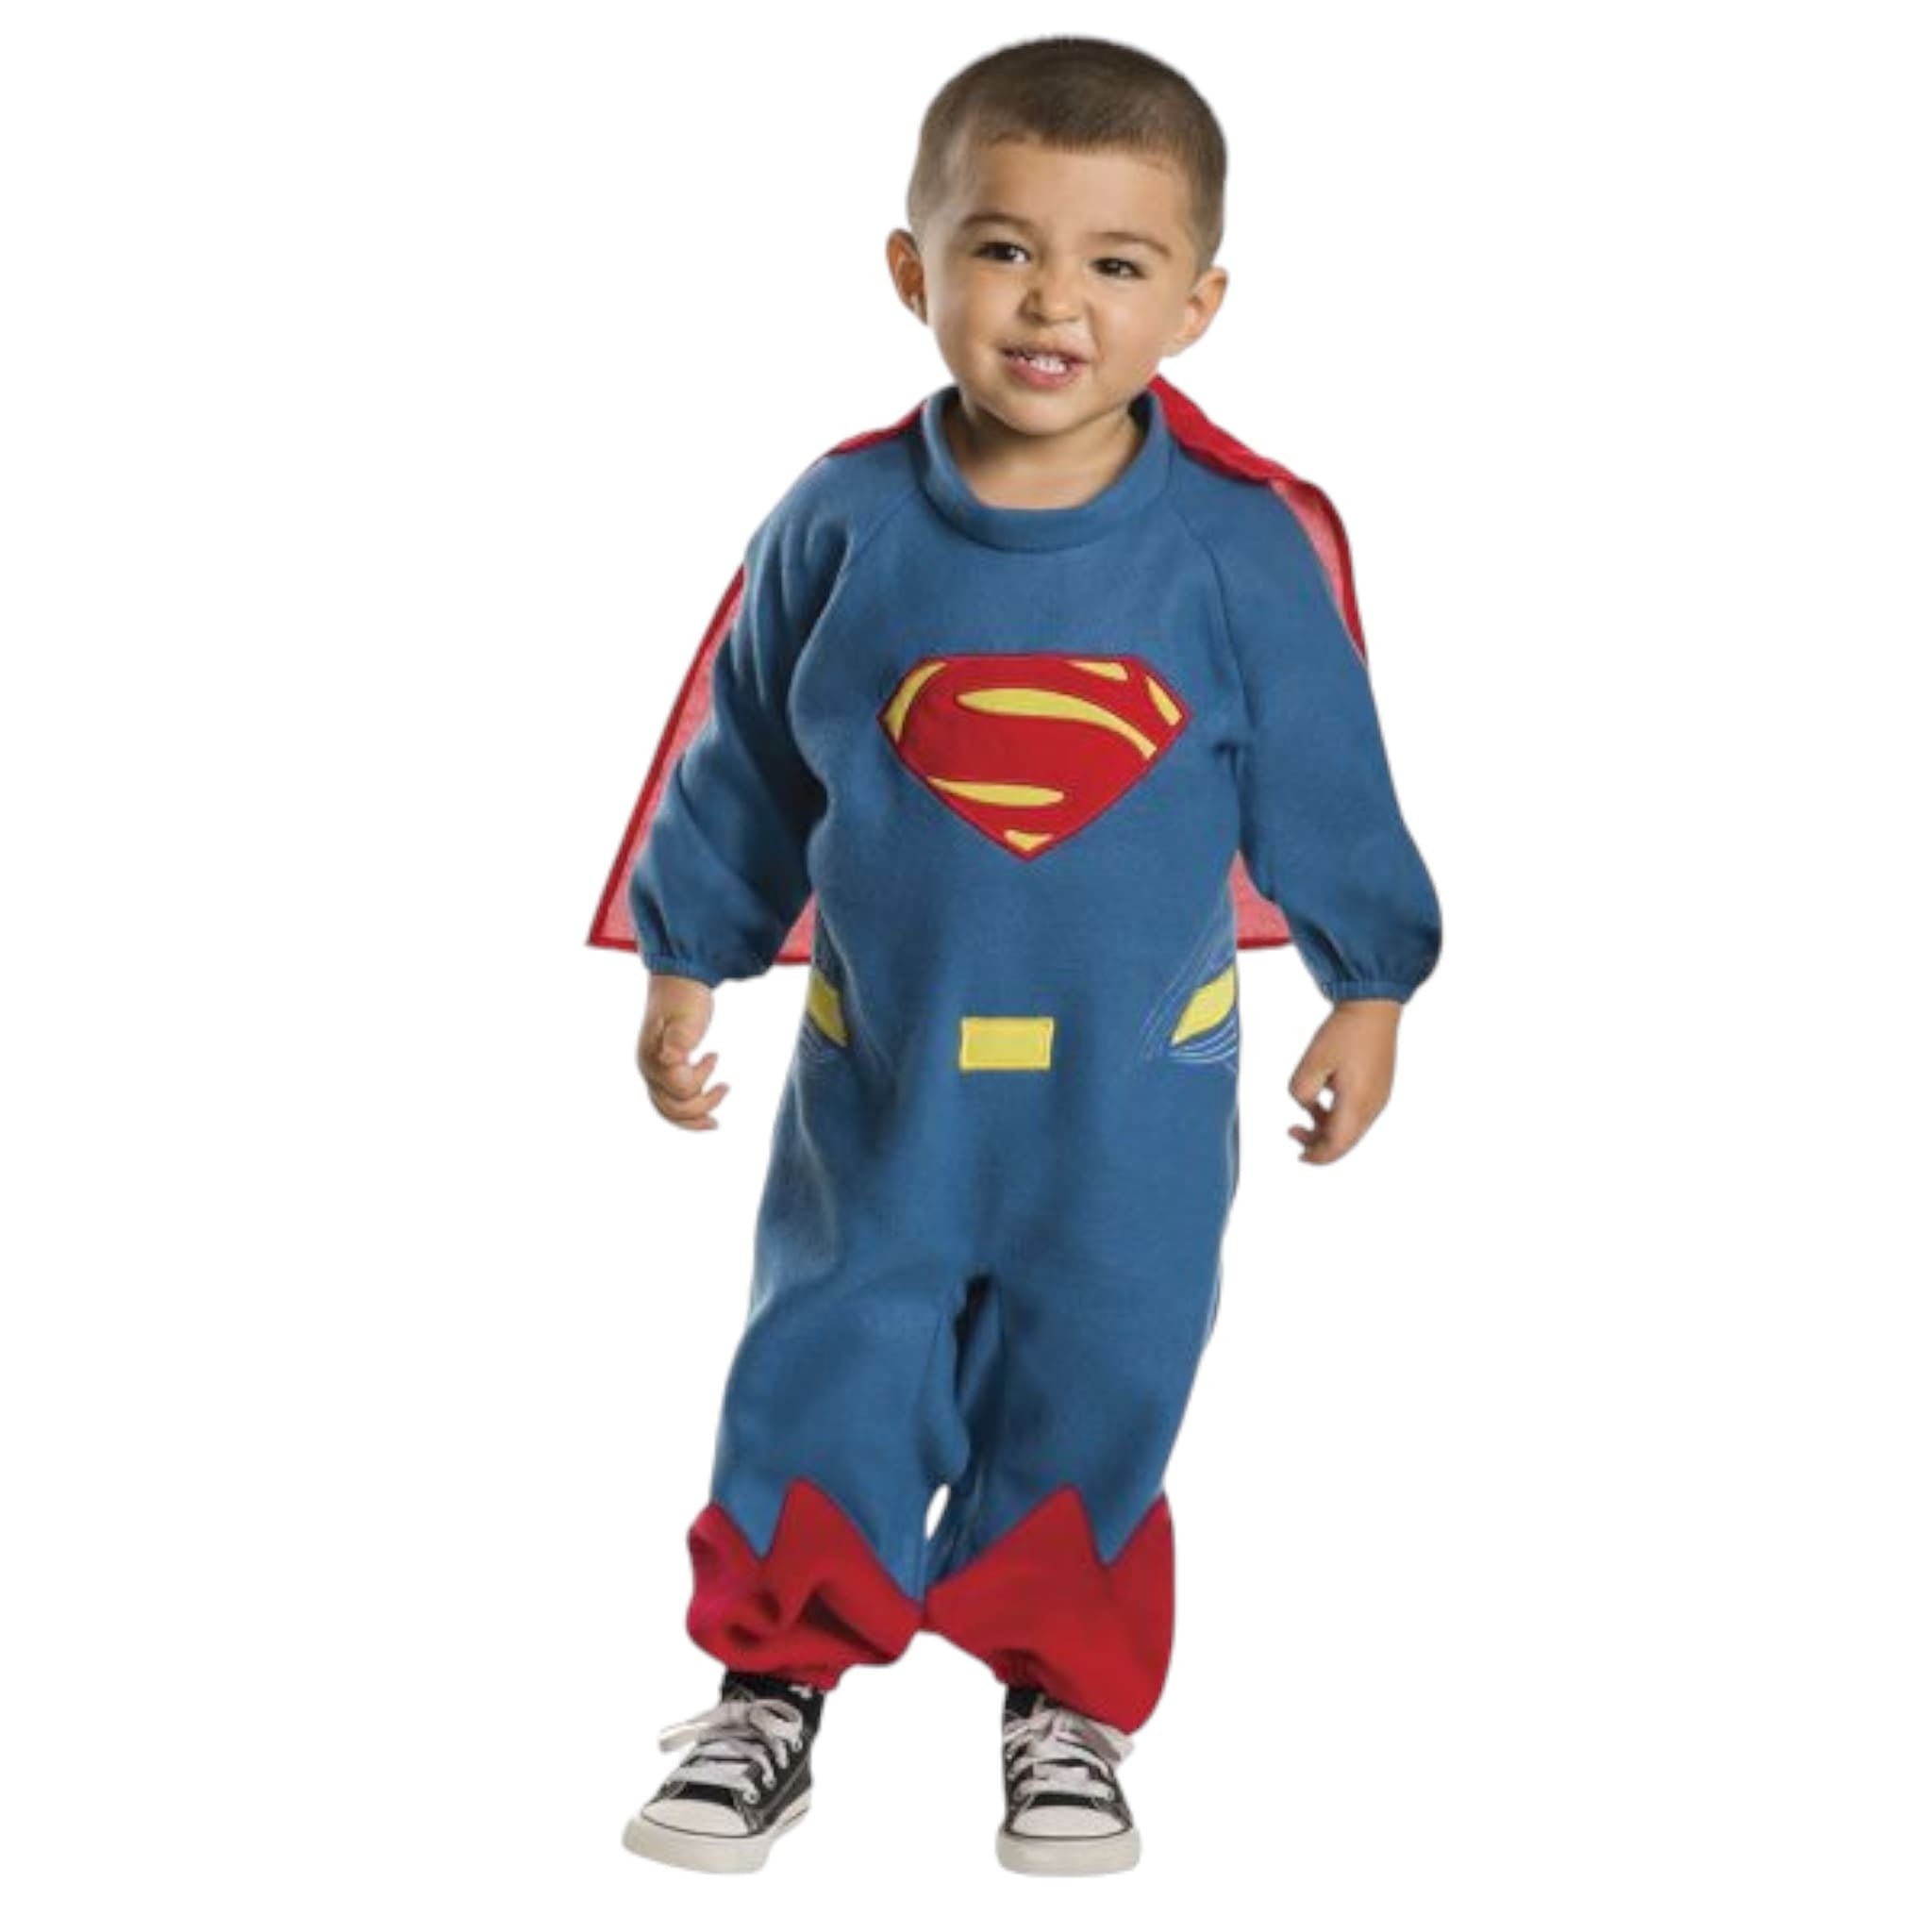 Superman-Outfit